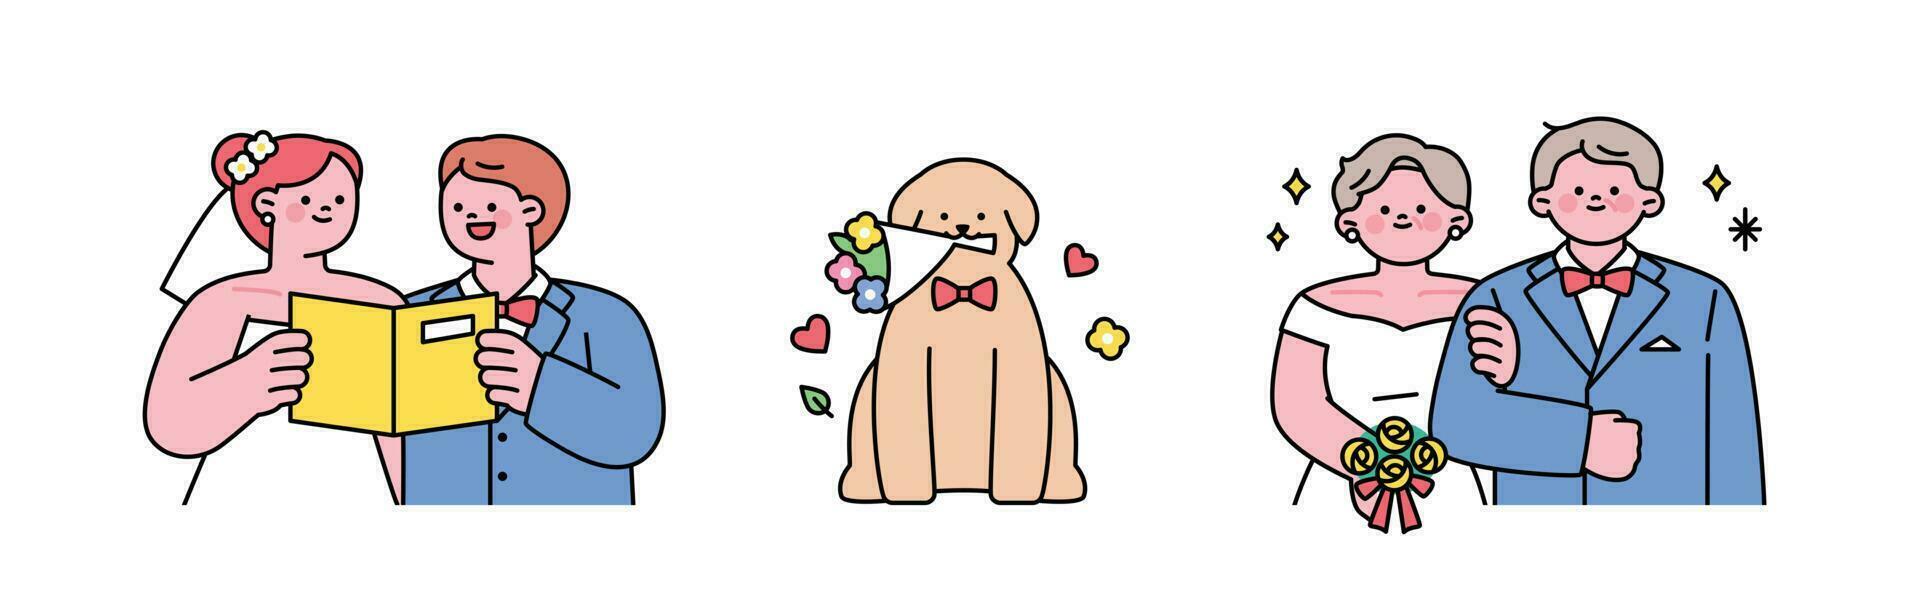 wedding. Marriage vows, dog with flowers, remind wedding. vector